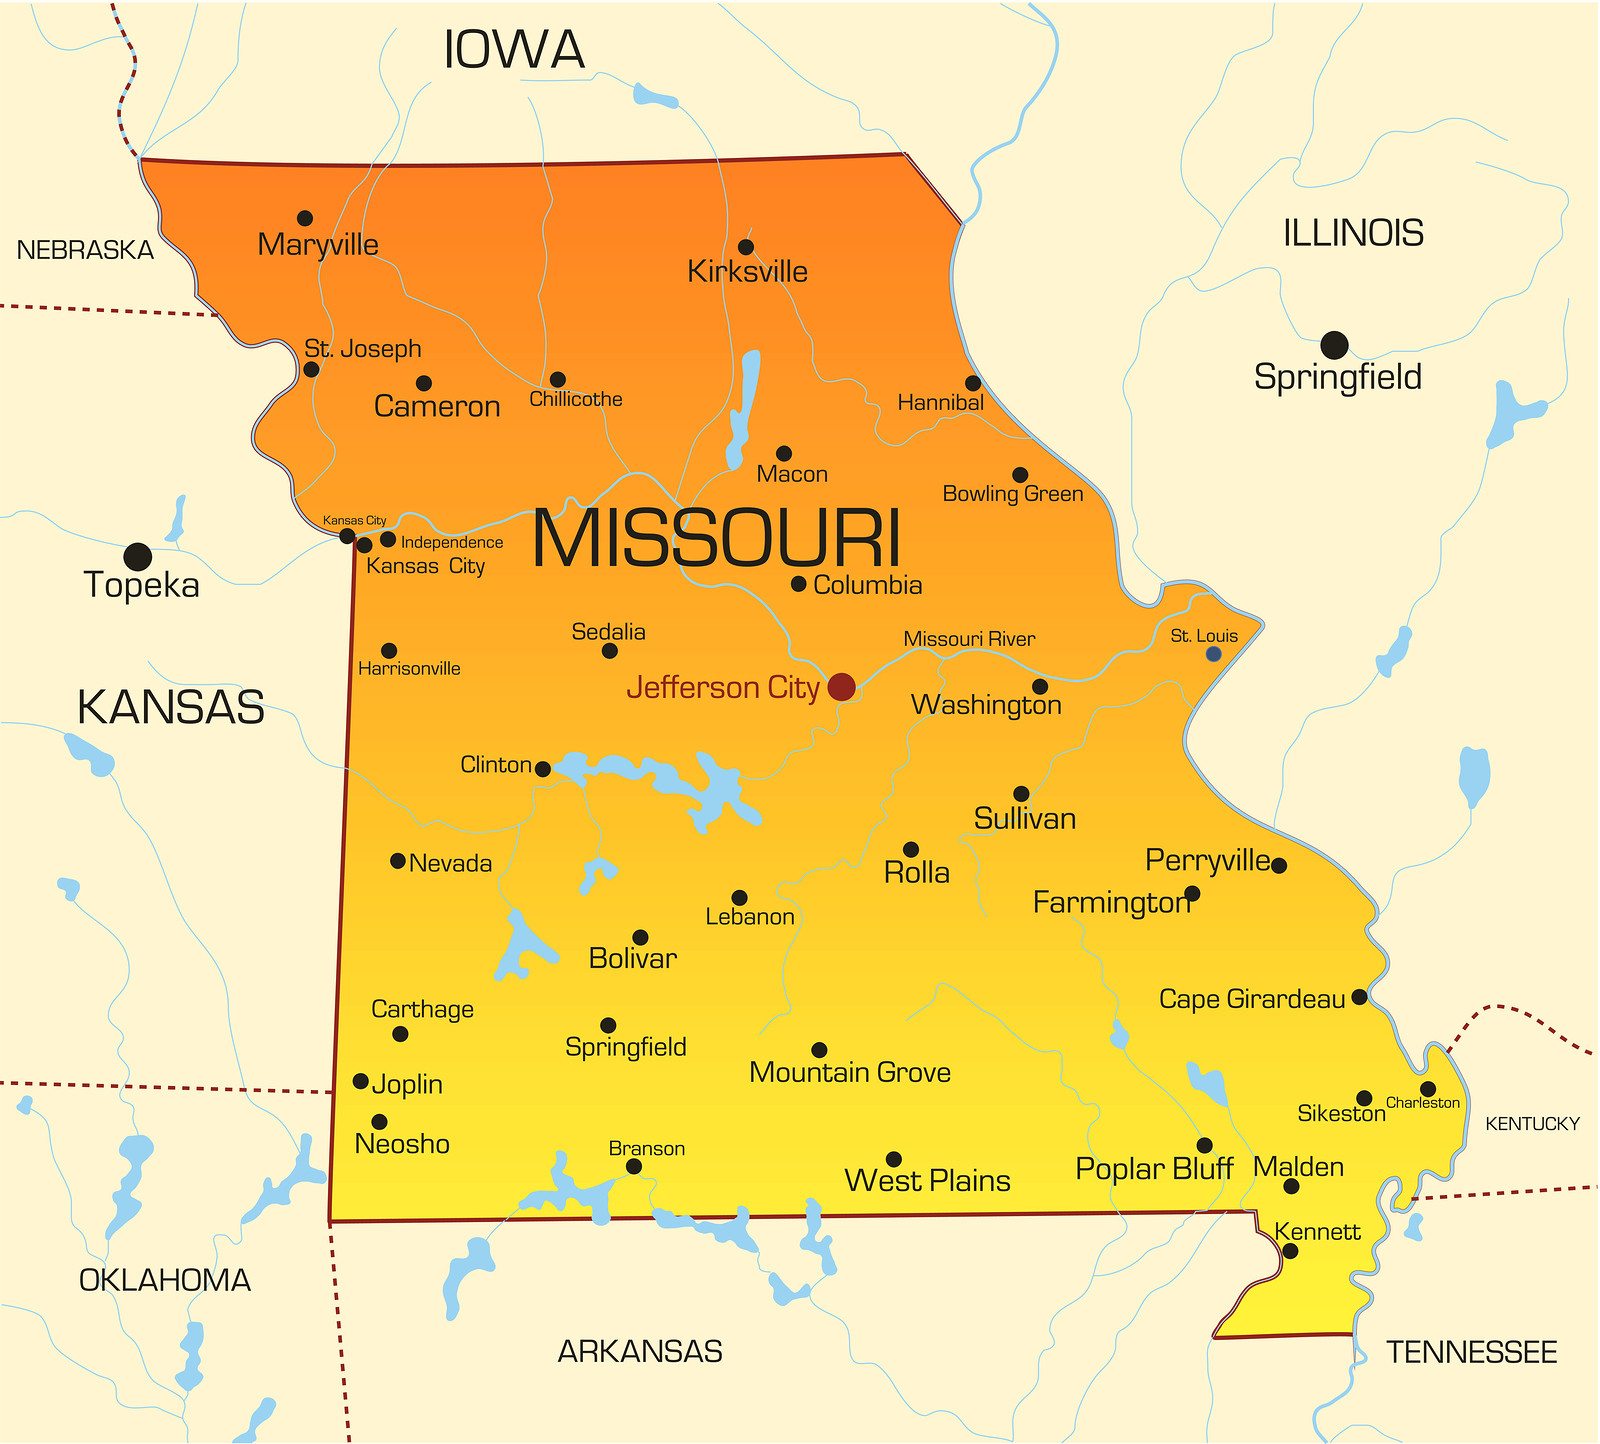 Missouri LPN Requirements and Training Programs